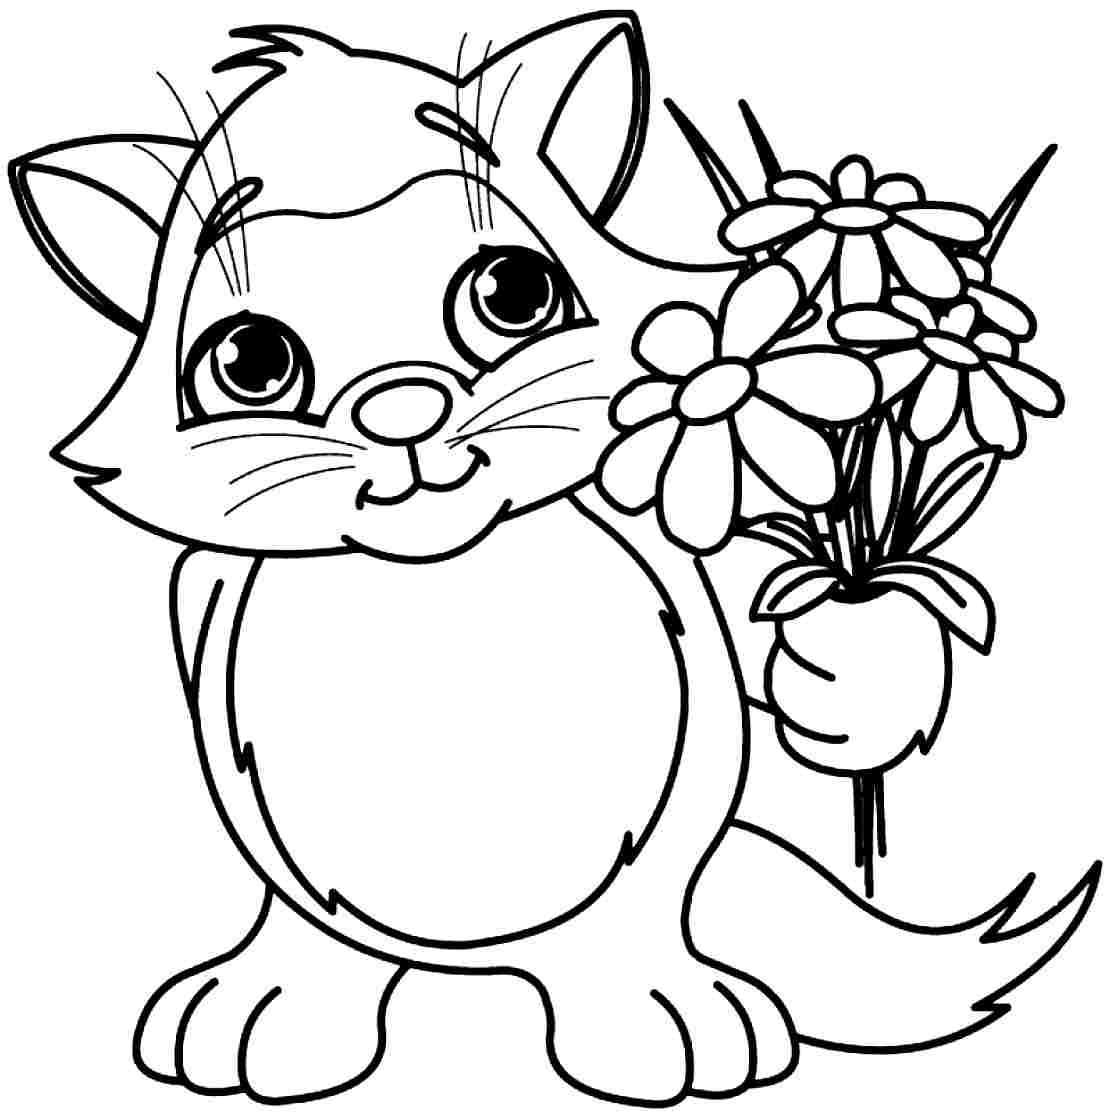 Free Printable Coloring Pages Of Flowers
 Flower